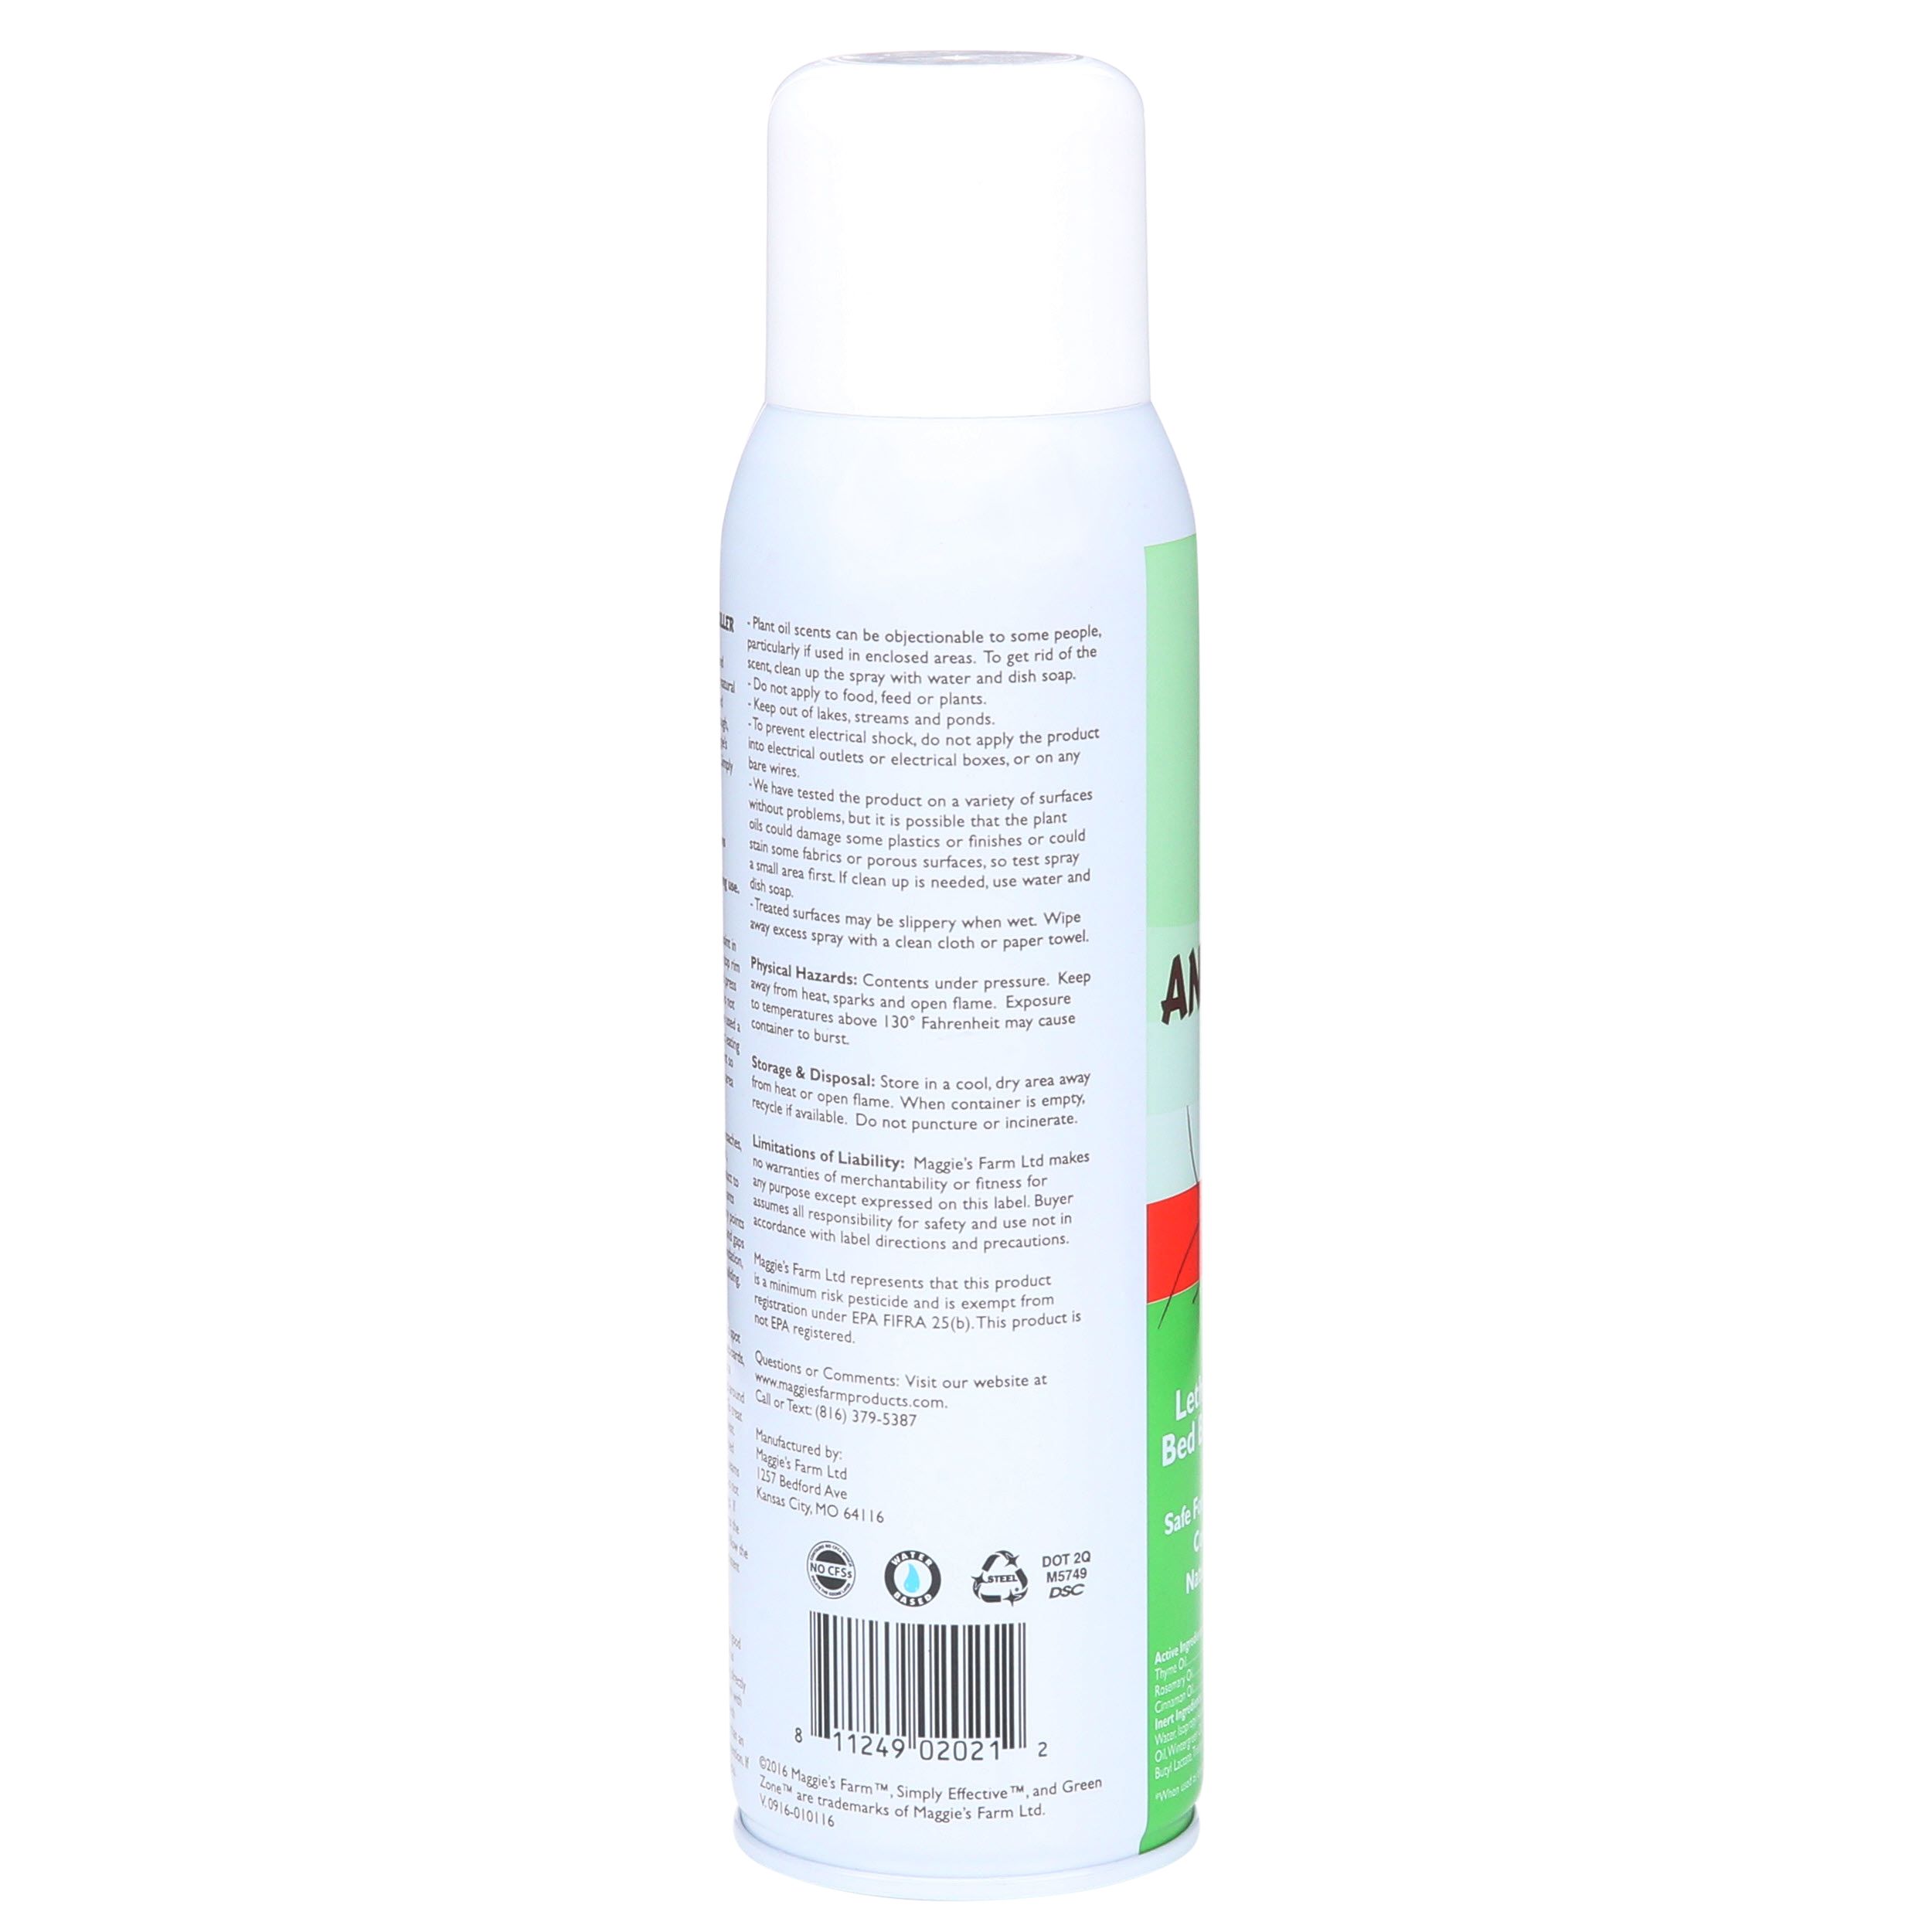 Simply Effective Natural Insect Repellent – Maggie's Farm Ltd